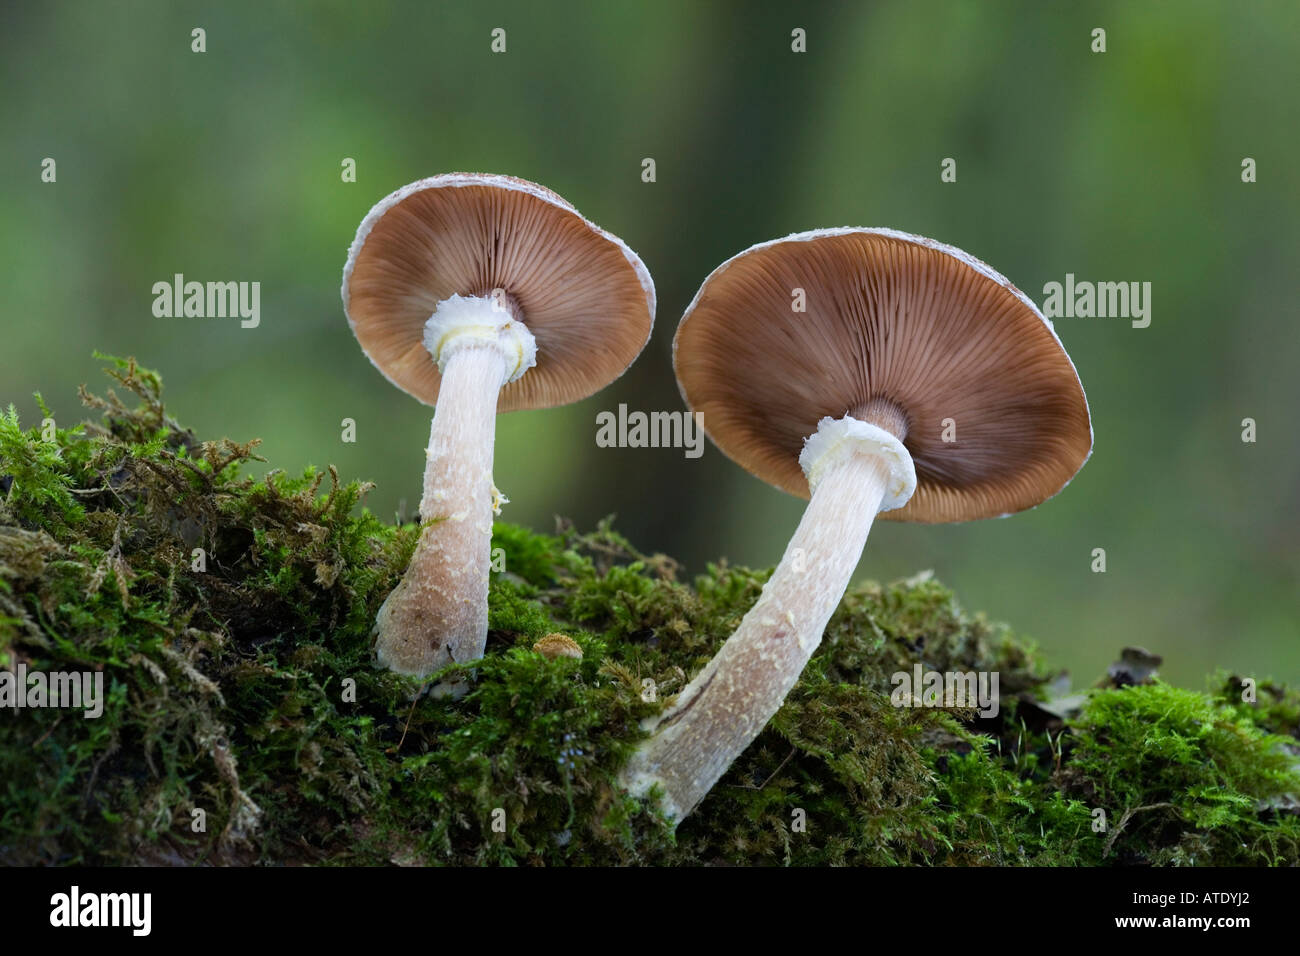 Armillaria gallica A lutea A bulbosa growing on log with nice out of focus background chicksands wood bedfordshire Stock Photo